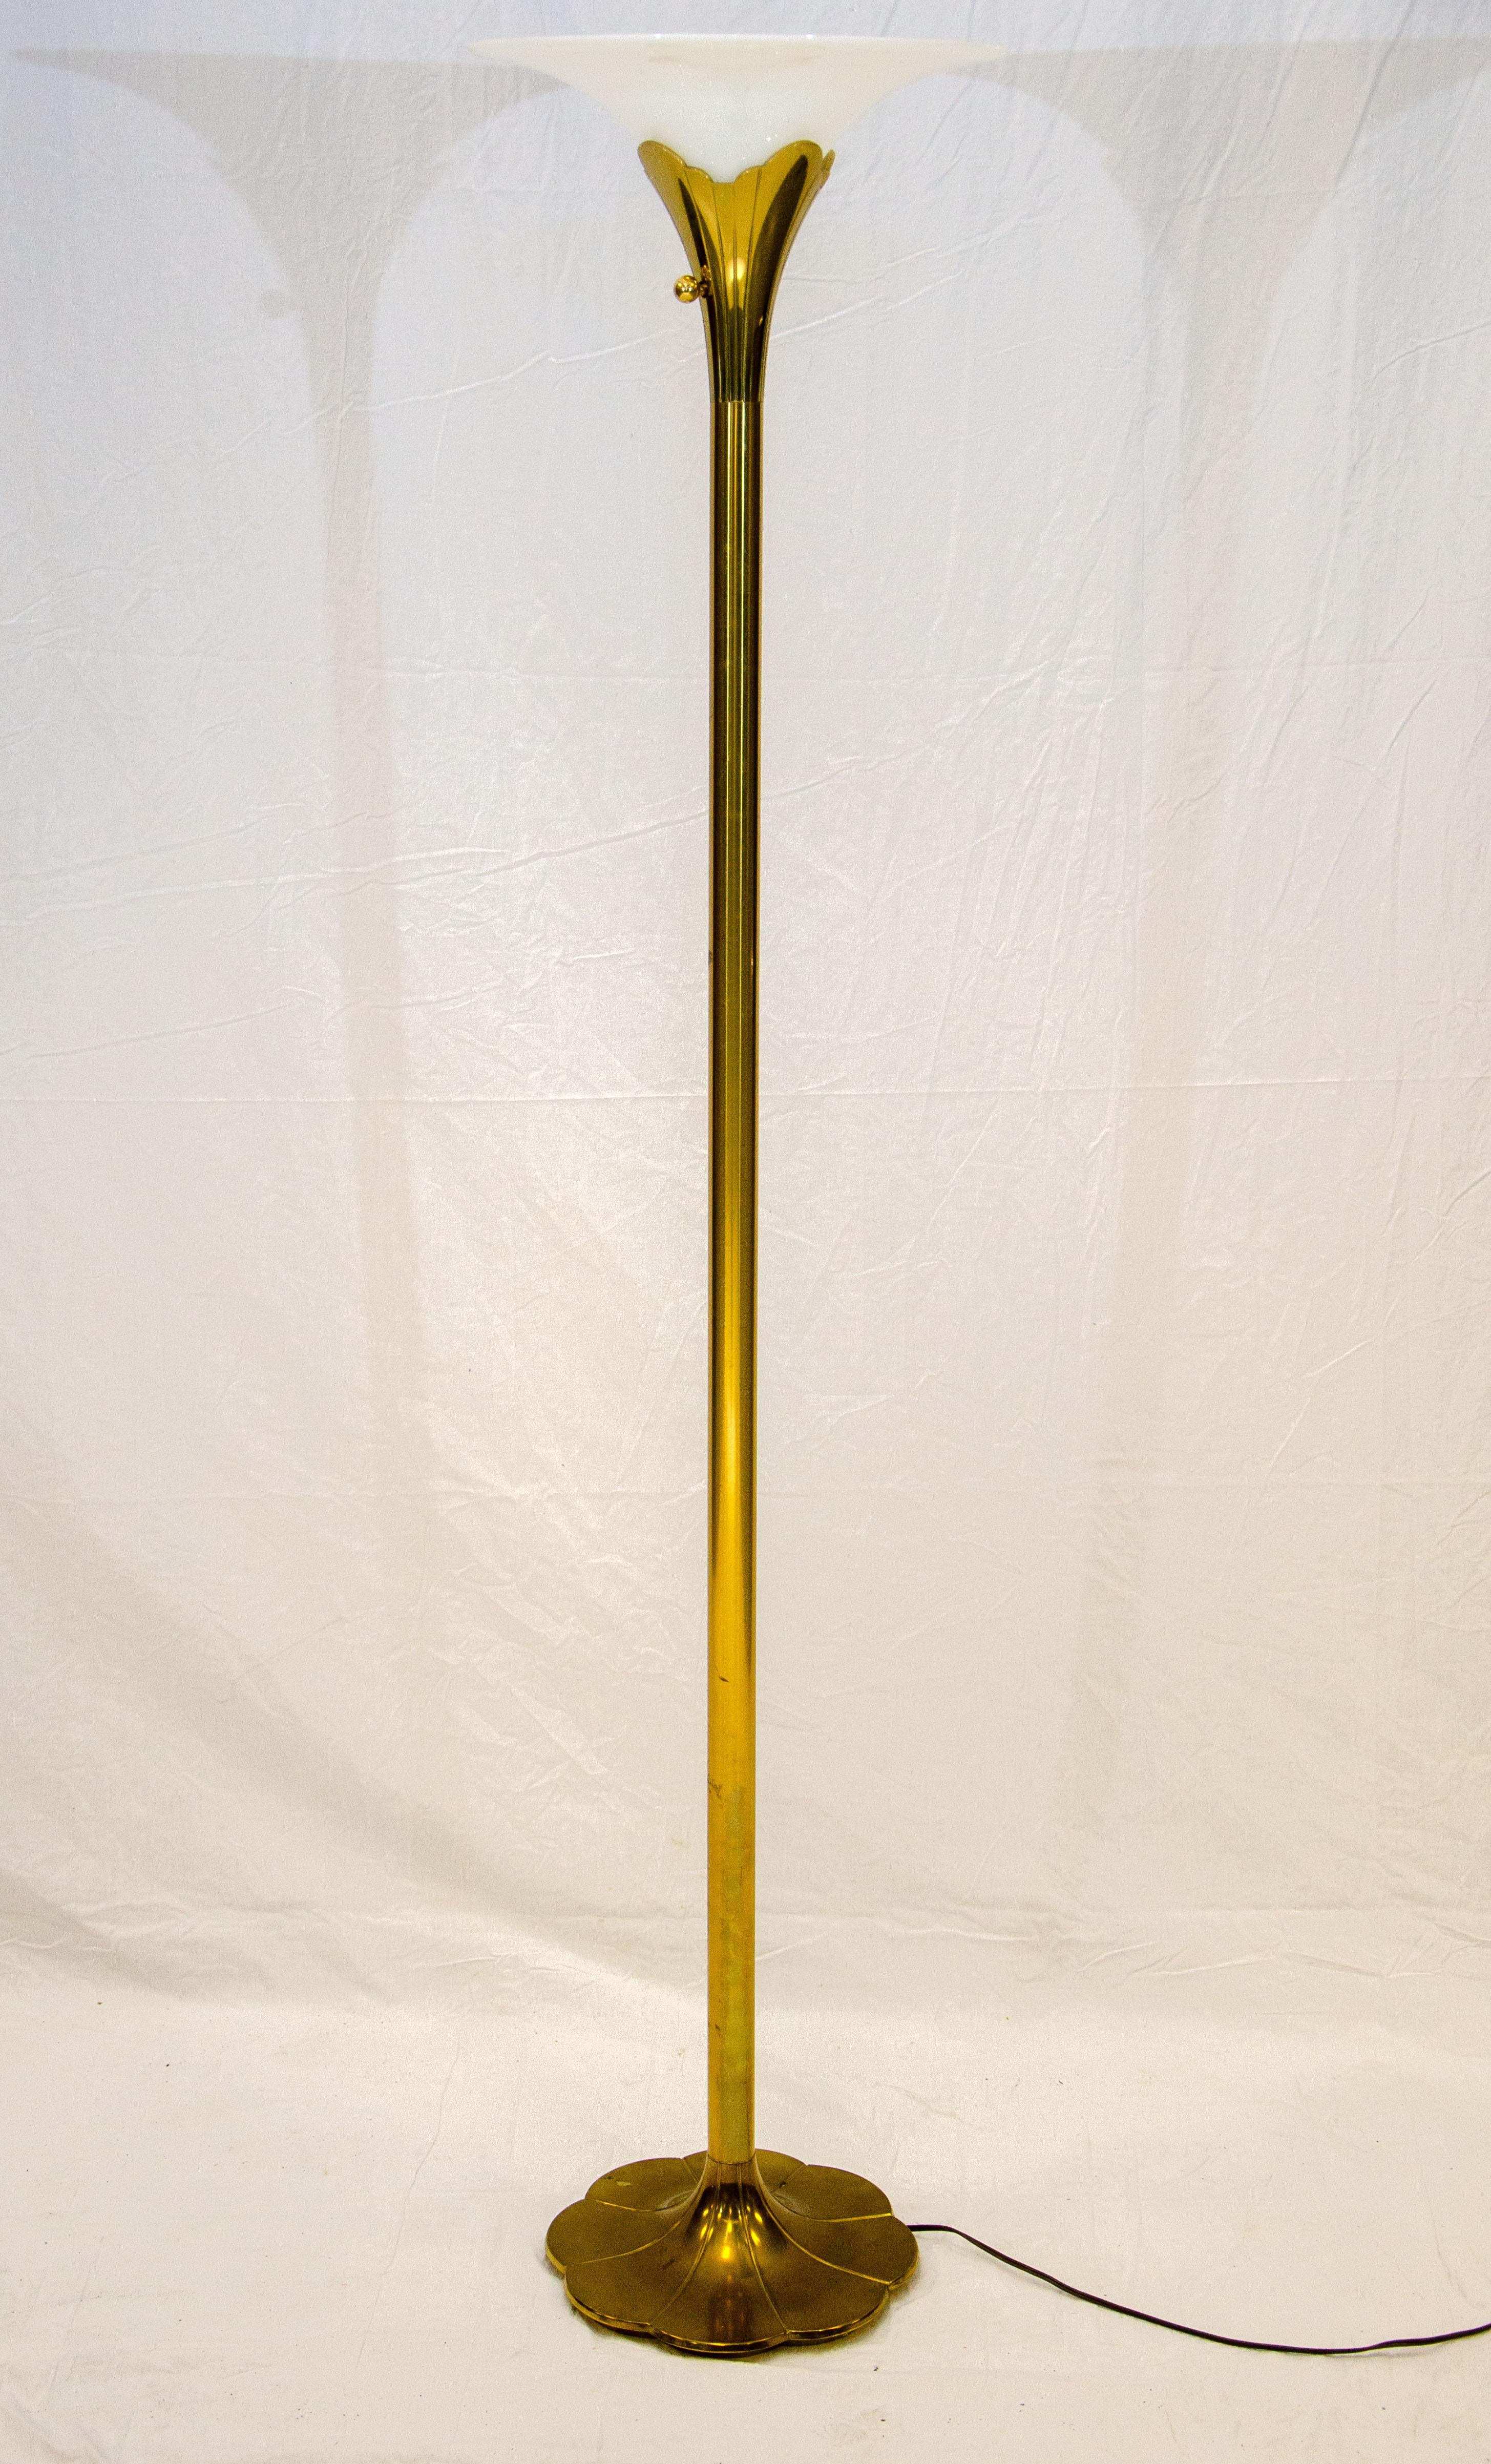 Unusual brass Stiffel torchiere floor lamp with a white glass shade that measures 14 1/2